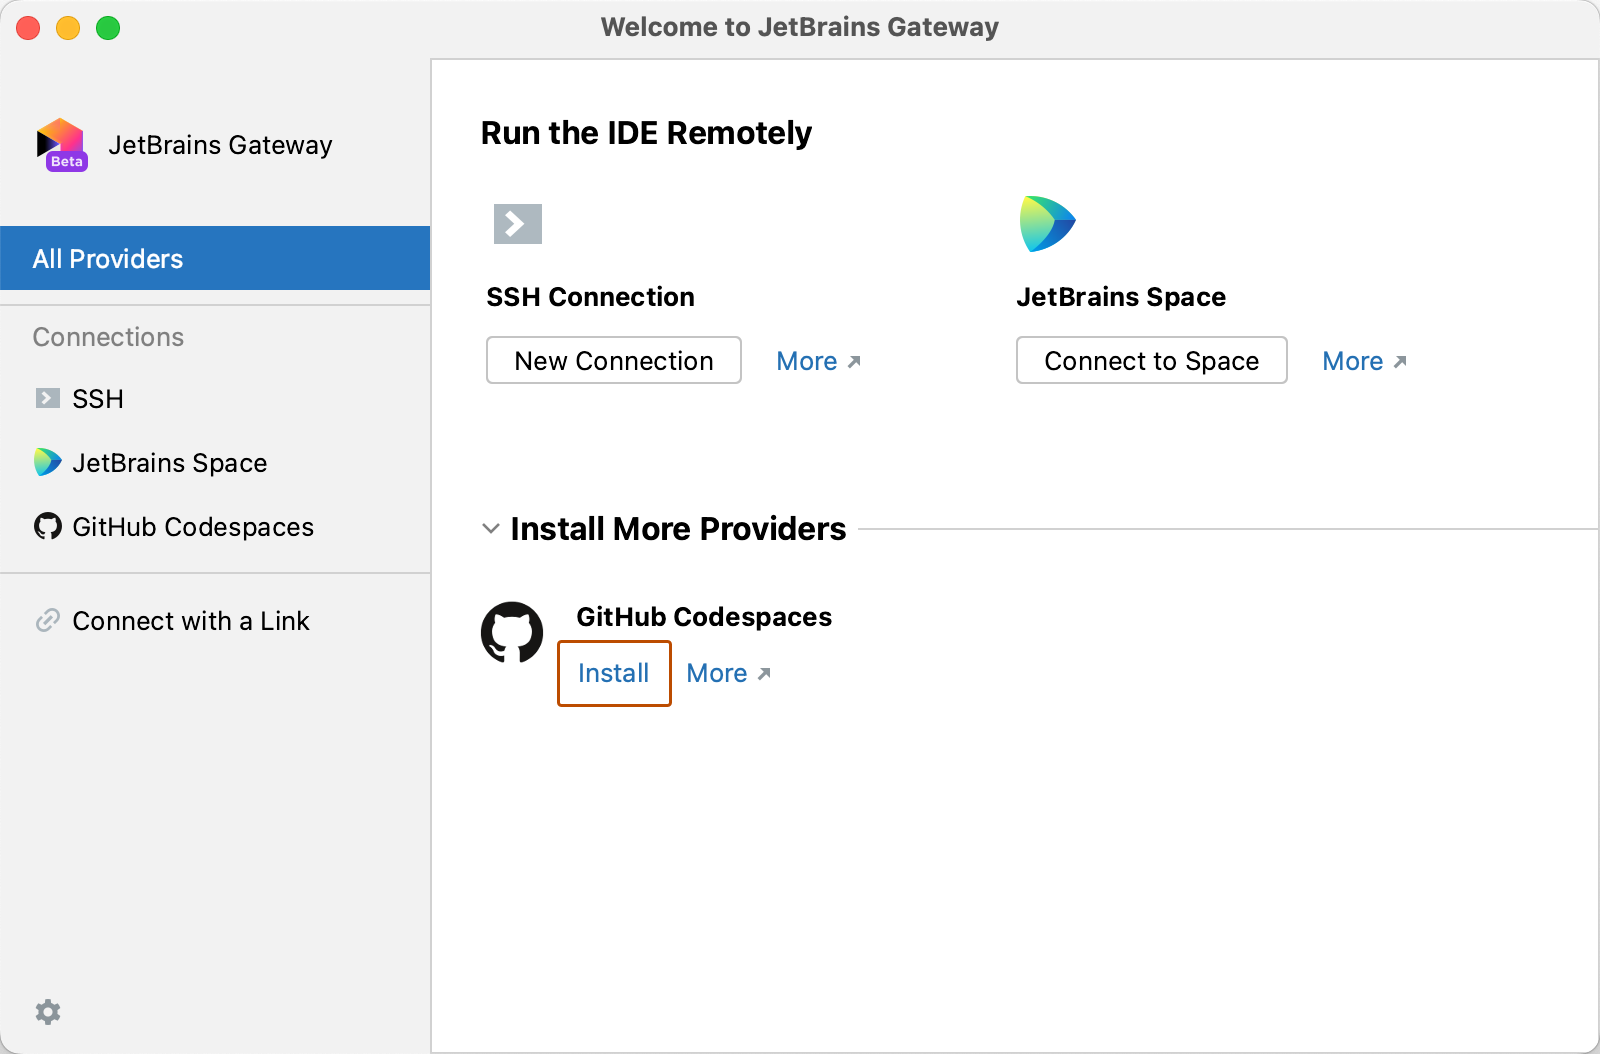 Screenshot of the "Welcome to JetBrains Gateway" page, with  "GitHub Codespaces" listed under "Install More Providers."